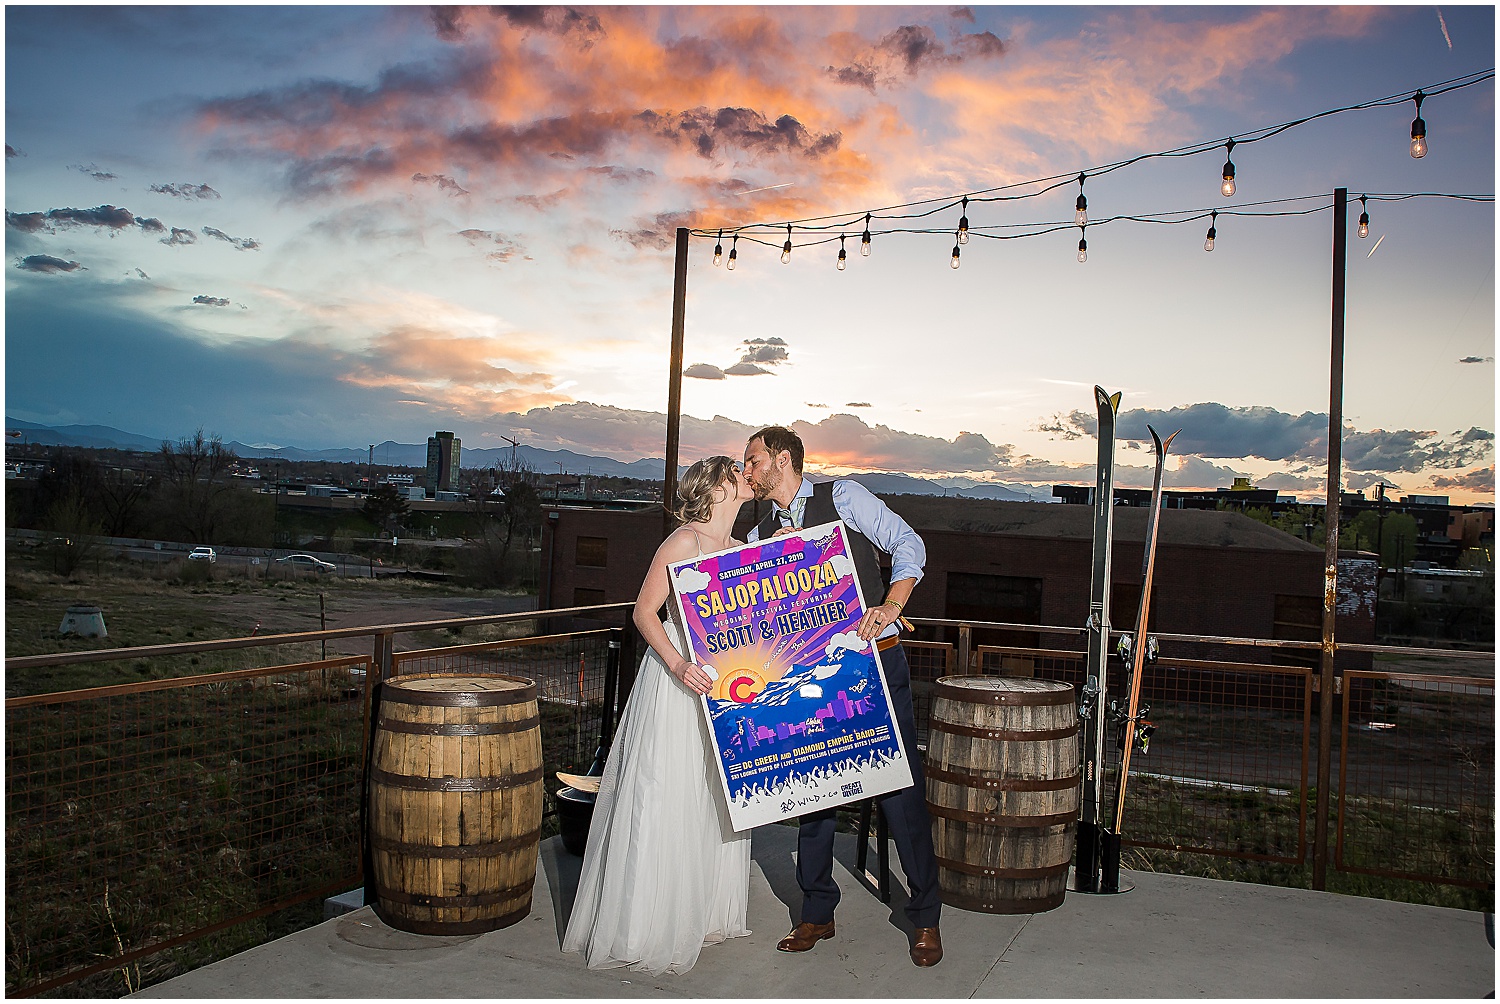 Great Divide Wedding Photos, Denver Colorado Wedding Photographer, brewery wedding, festival, festival theme wedding, getting ready, wedding dress, wedding hairstyle, bride, makeup, wedding day, wedding flowers, wedding inspiration, first look, groom, wedding couple, great divide beer, brewery wedding, colorado wedding, unique wedding theme, wedding toasts, reception, party, sunset, bride and groom, outdoor portraits